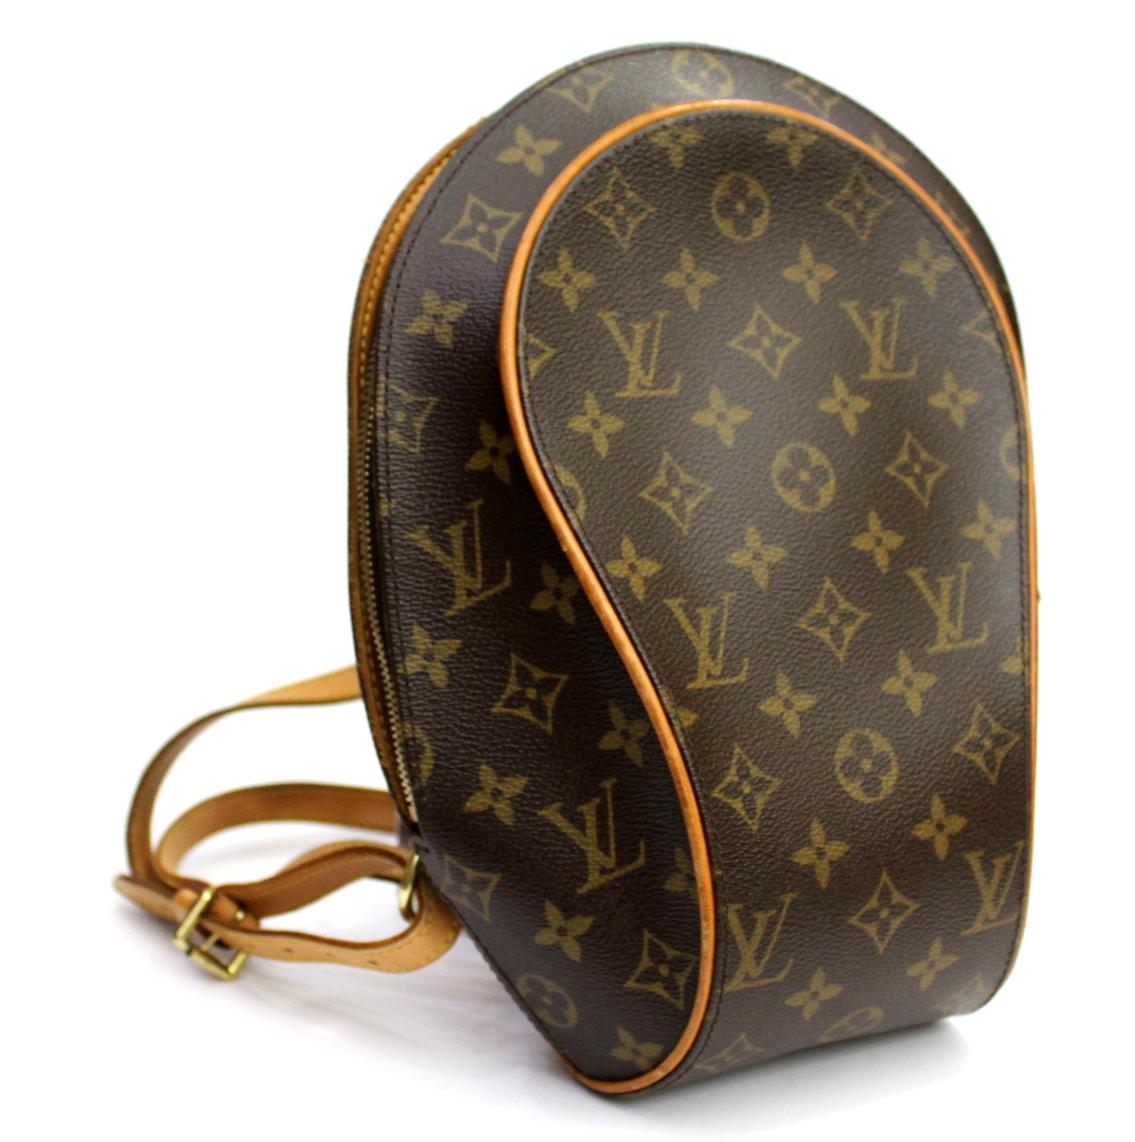 This chic and stylish Louis Vuitton Monogram Canvas Ellipse Sac a Dos Backpack is great for ultimate hands-free convenience. It features a sleek structured design with a spacious interior that will hold all your daily necessities in style. 